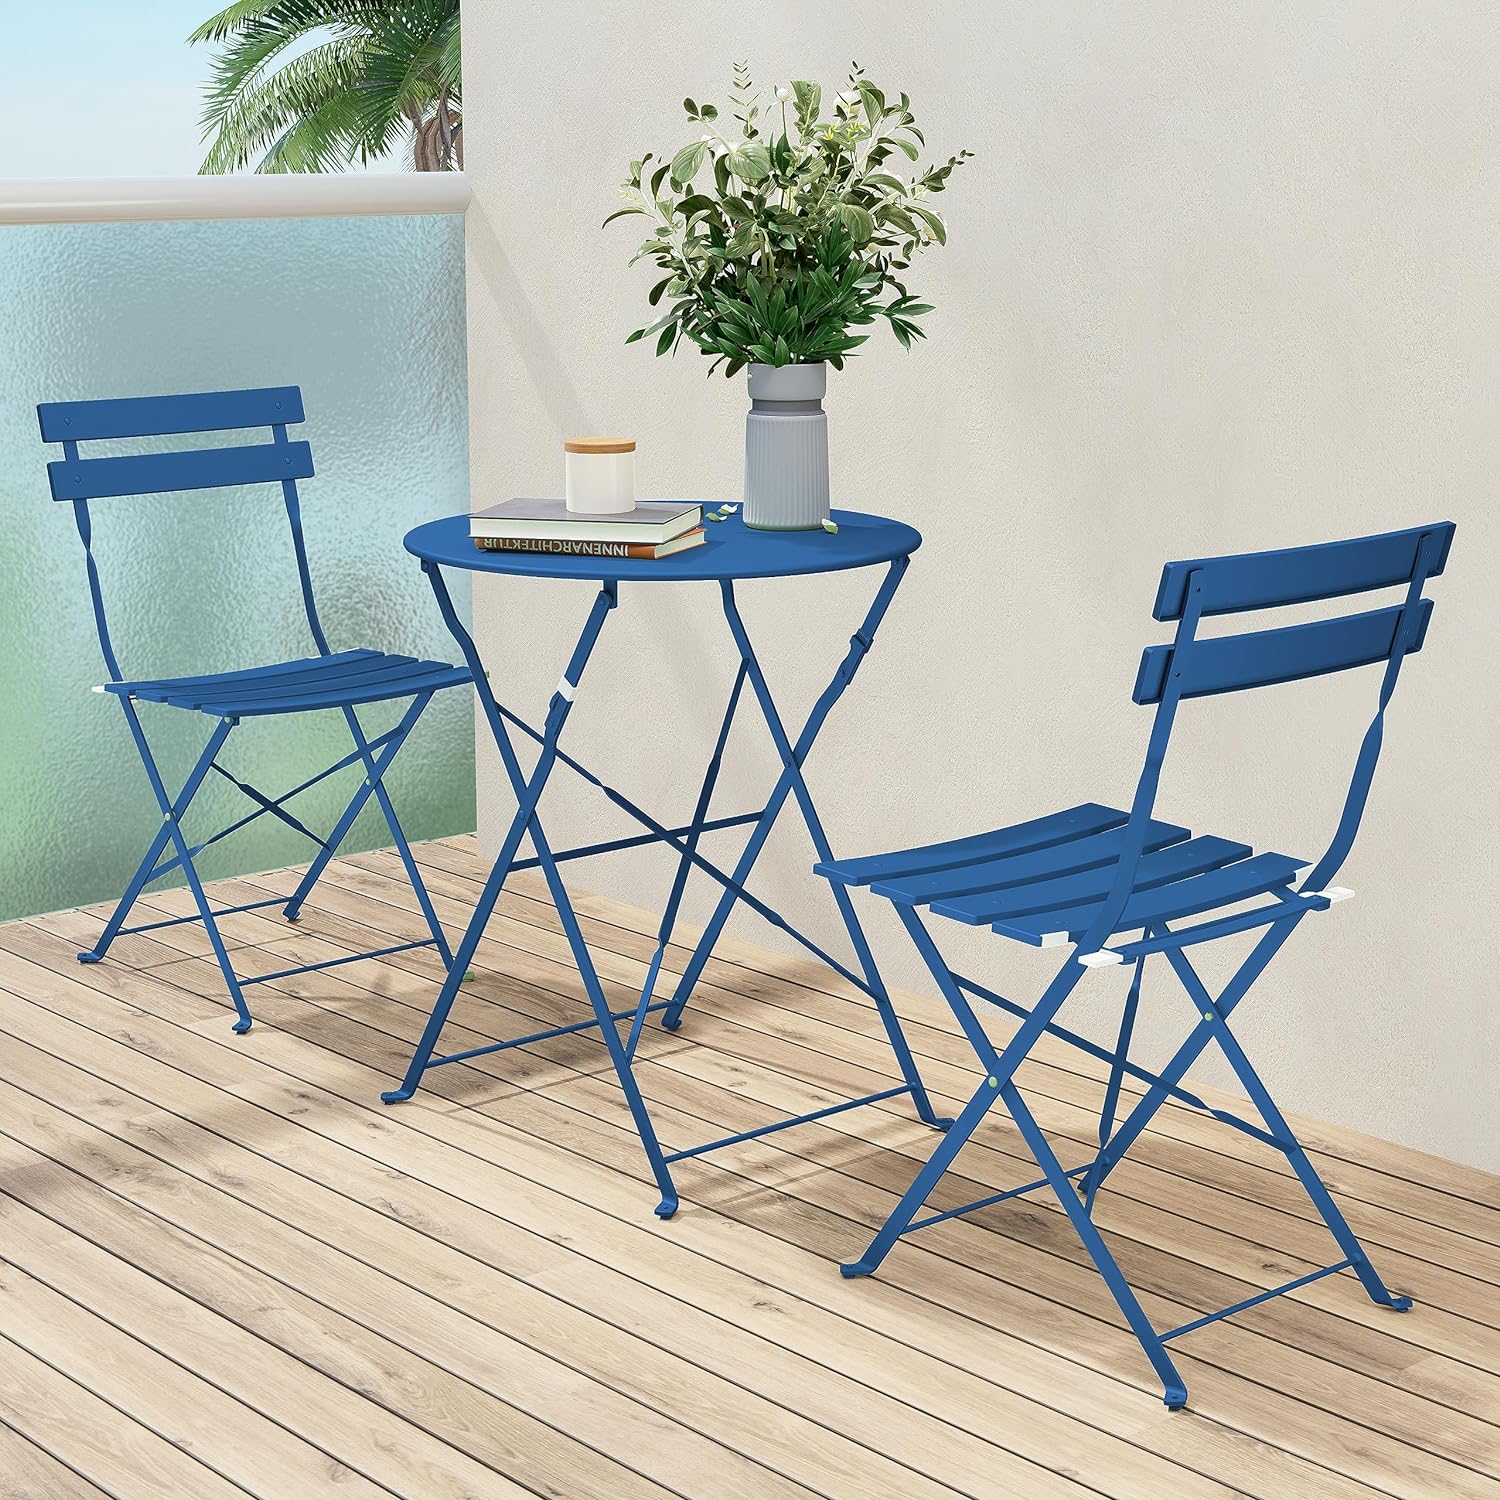 Grand Patio Metal 3-Piece Folding Bistro Table and Chairs Set, Outdoor Patio Dining Furniture for Small Spaces, Balcony, Peacock Blue - image 4 of 11